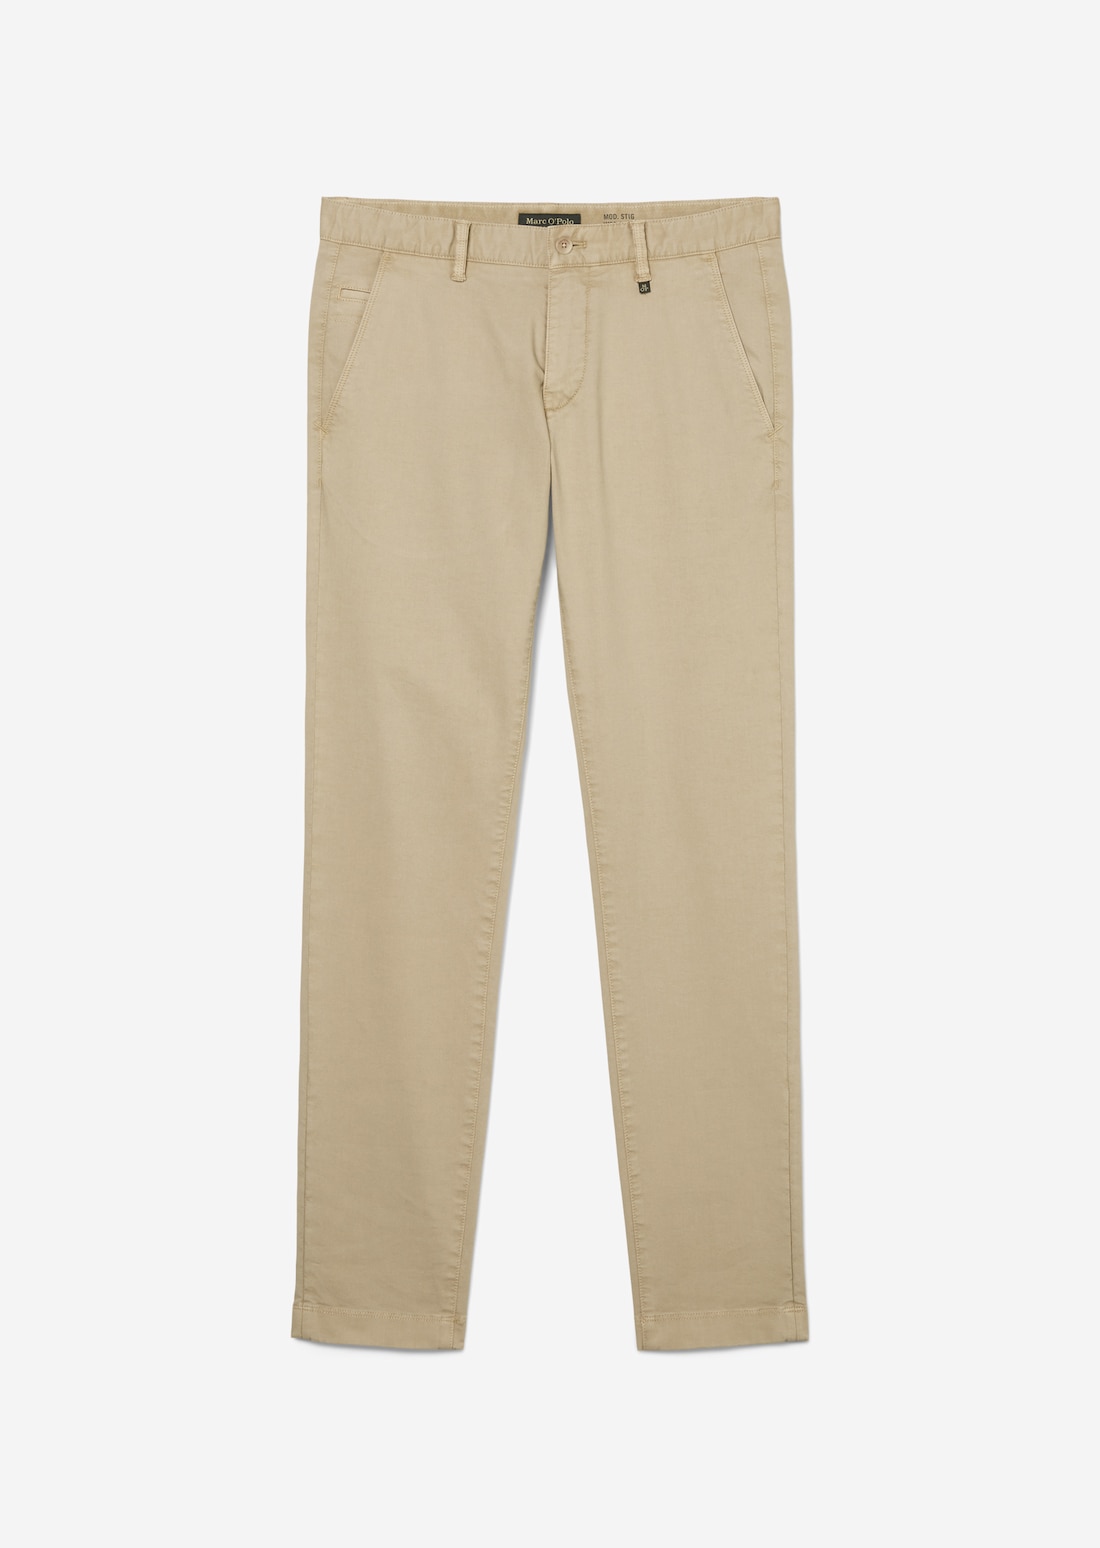 STIG shaped chinos made of blended cotton - beige | Women | MARC O’POLO